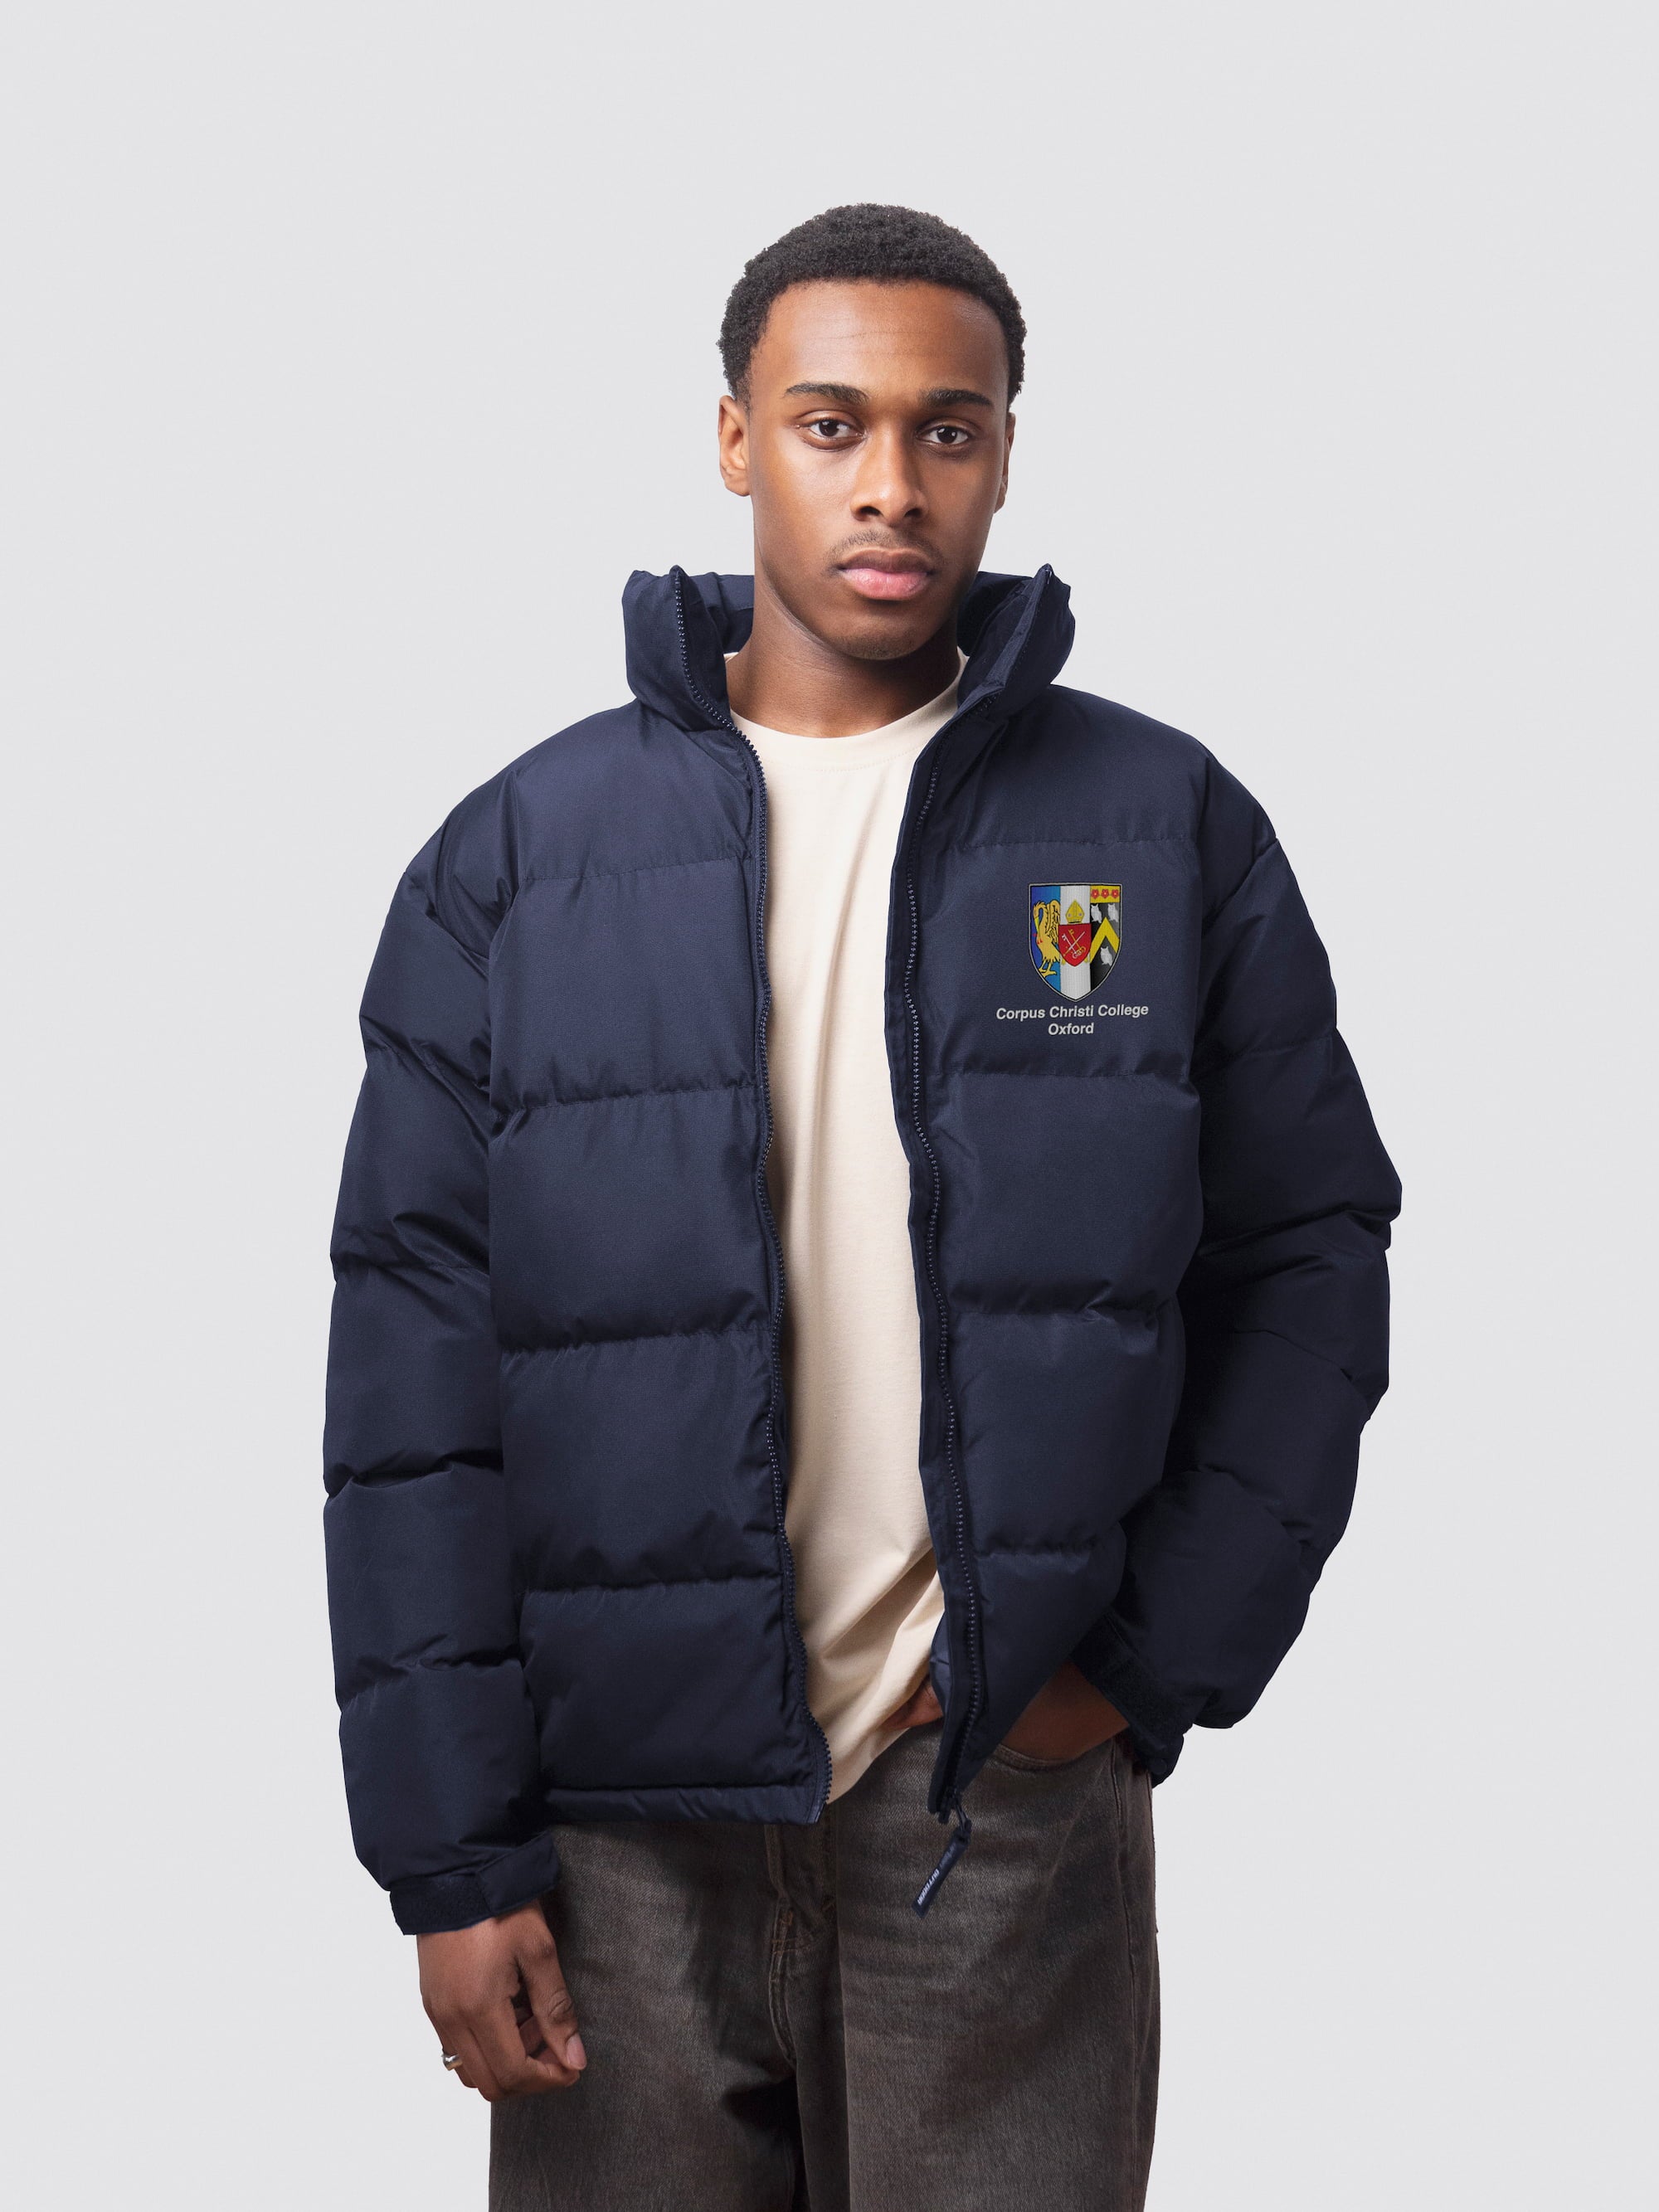  Navy Oxford University puffer jacket, with embroidery on the left chest